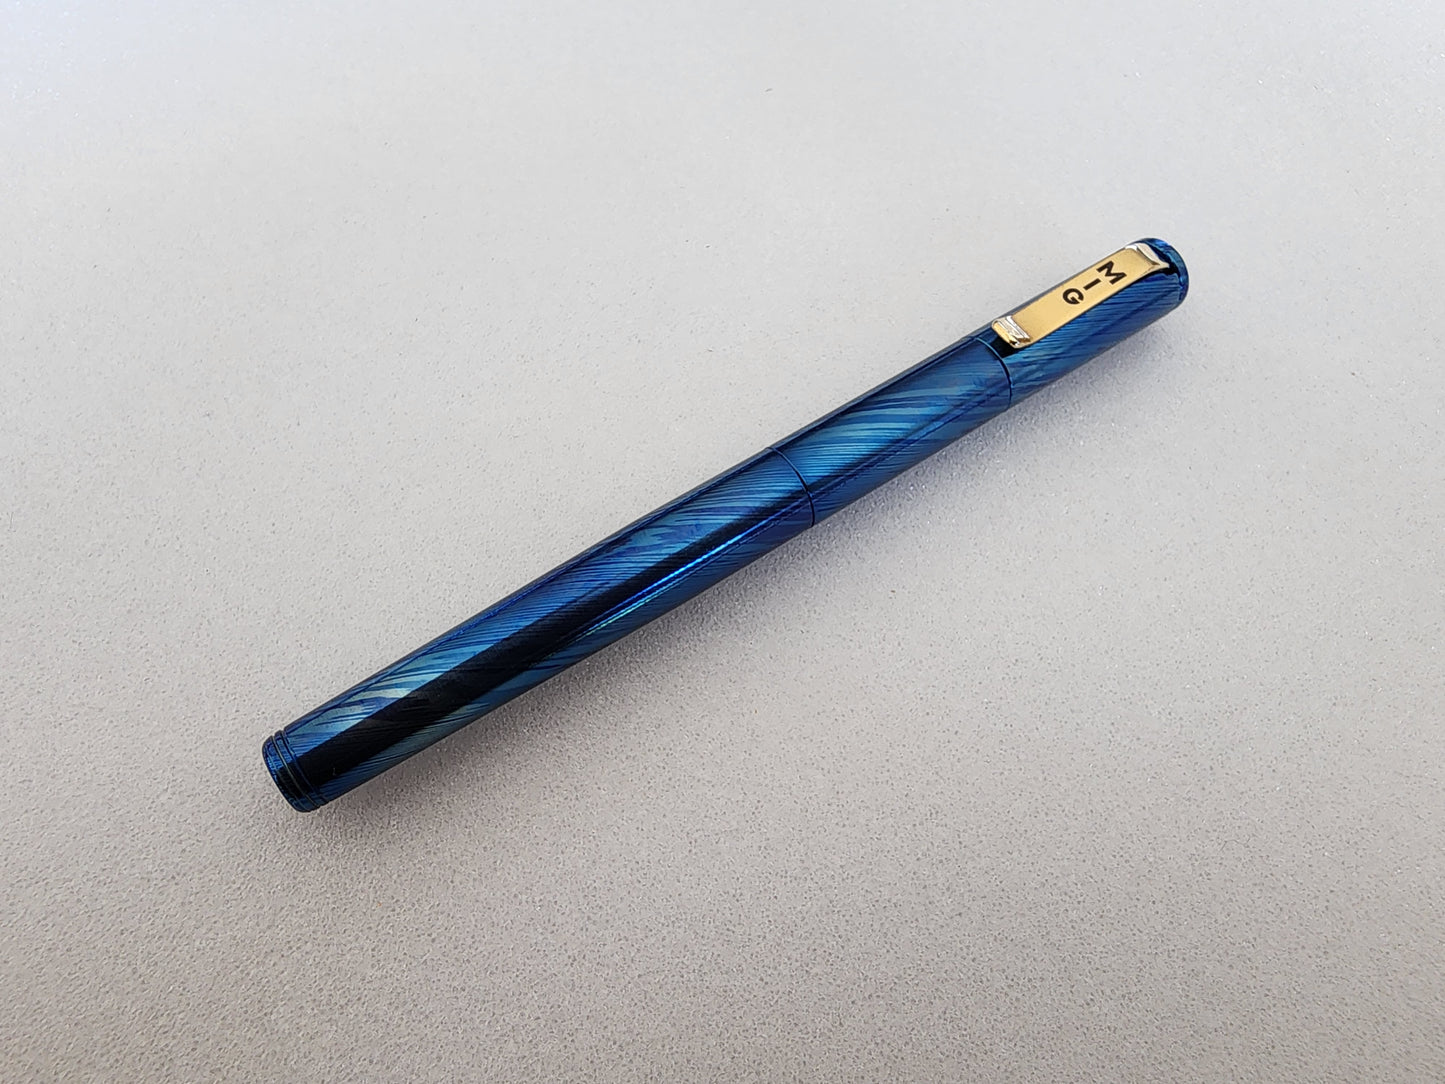 MIG Fountain Pen (Timascus) - Gold Plated Hardware